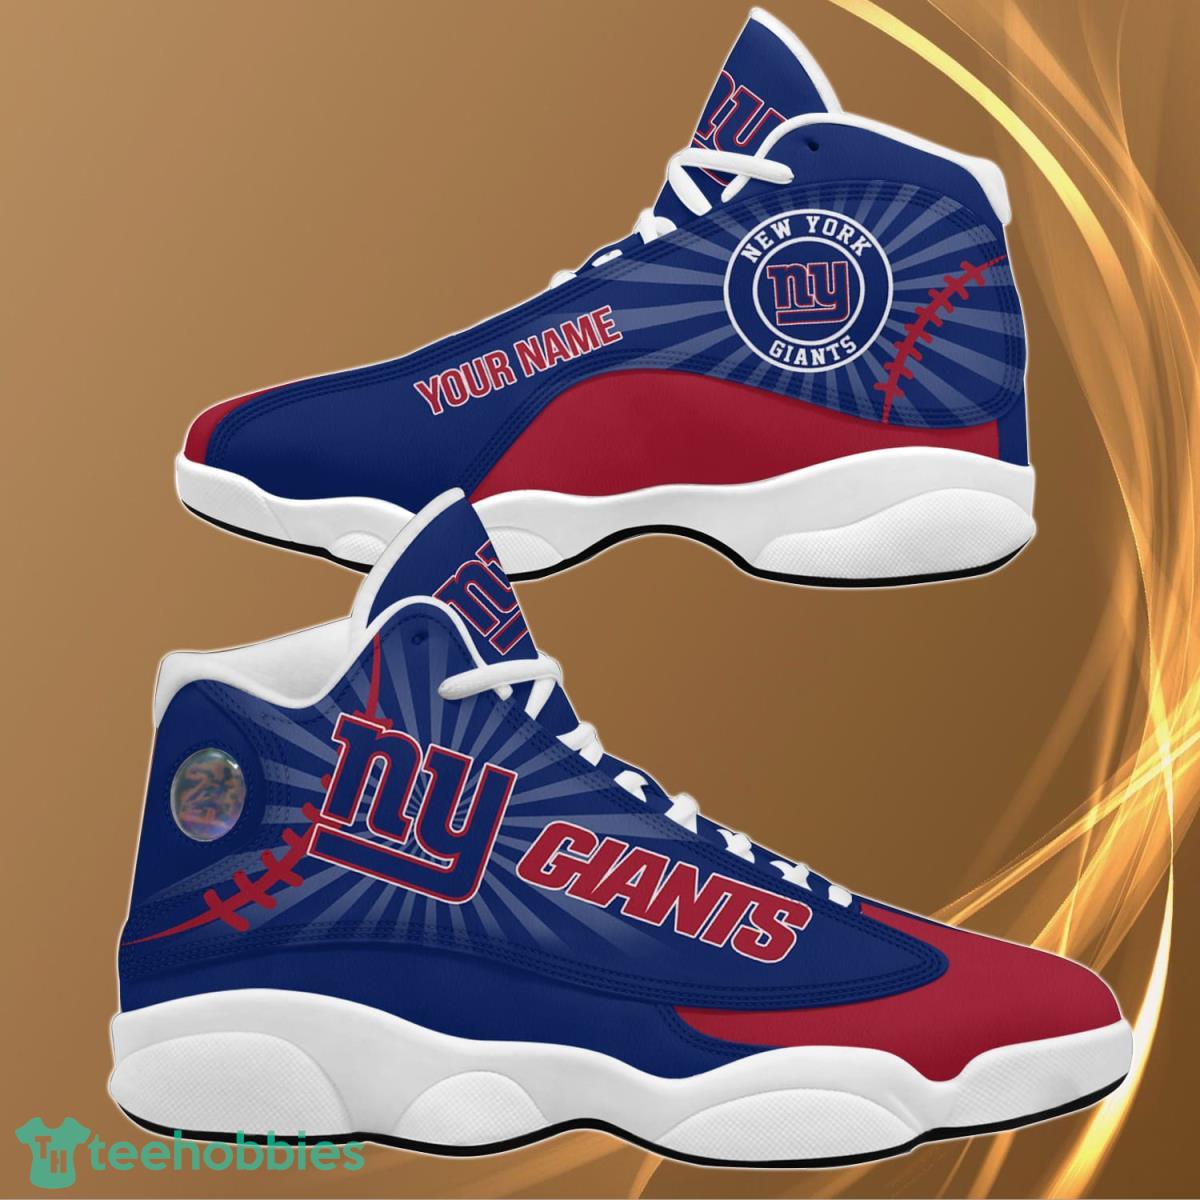 New York Giants Limited Edition Air Jordan 13 Sneaker For Fans